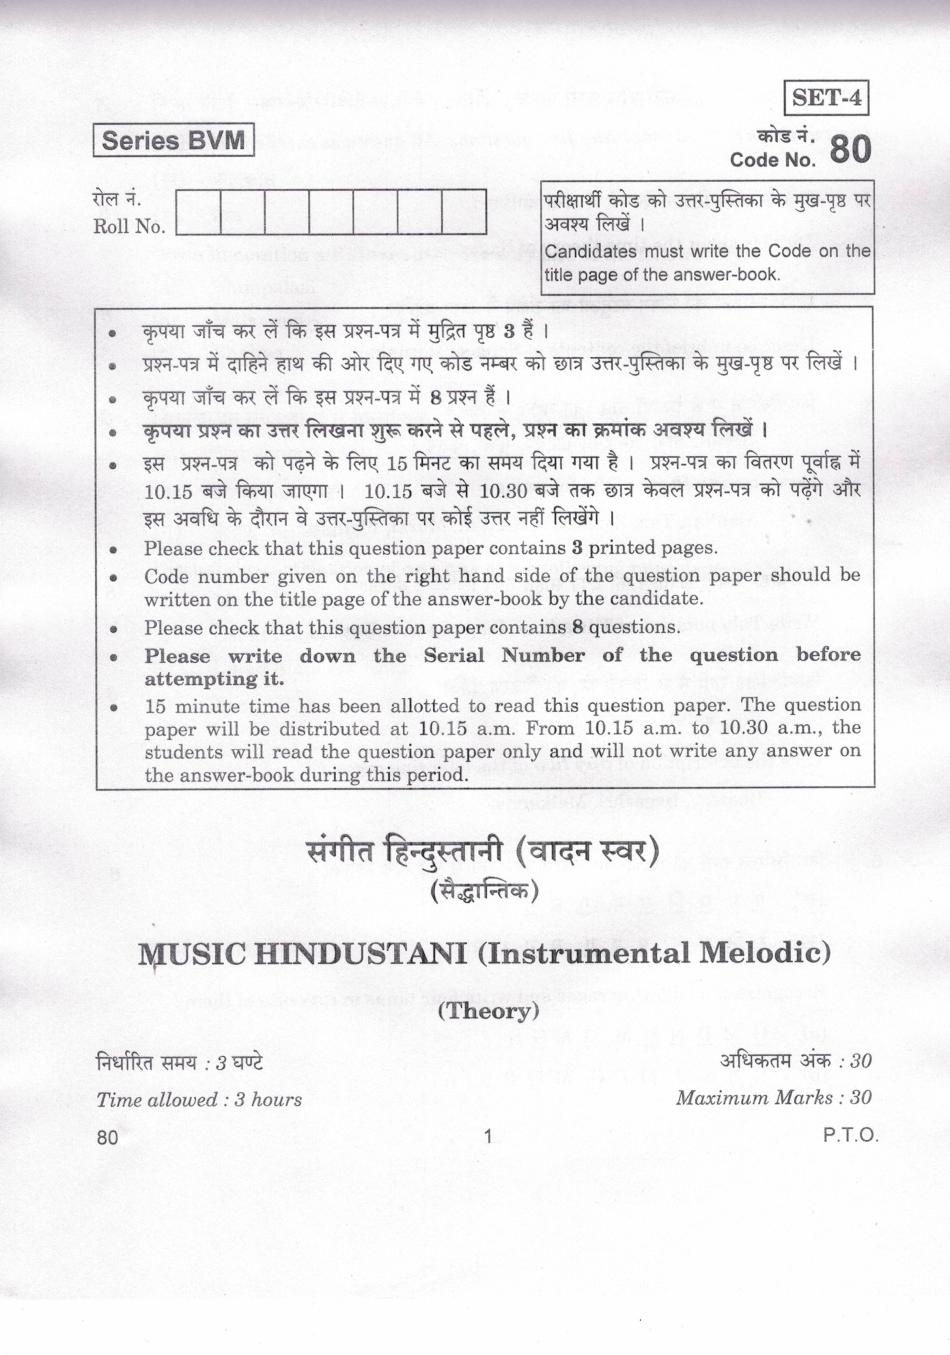 CBSE Class 12 Music Hindustani (Instrumental Melodic) Question Paper 2019 - Page 1